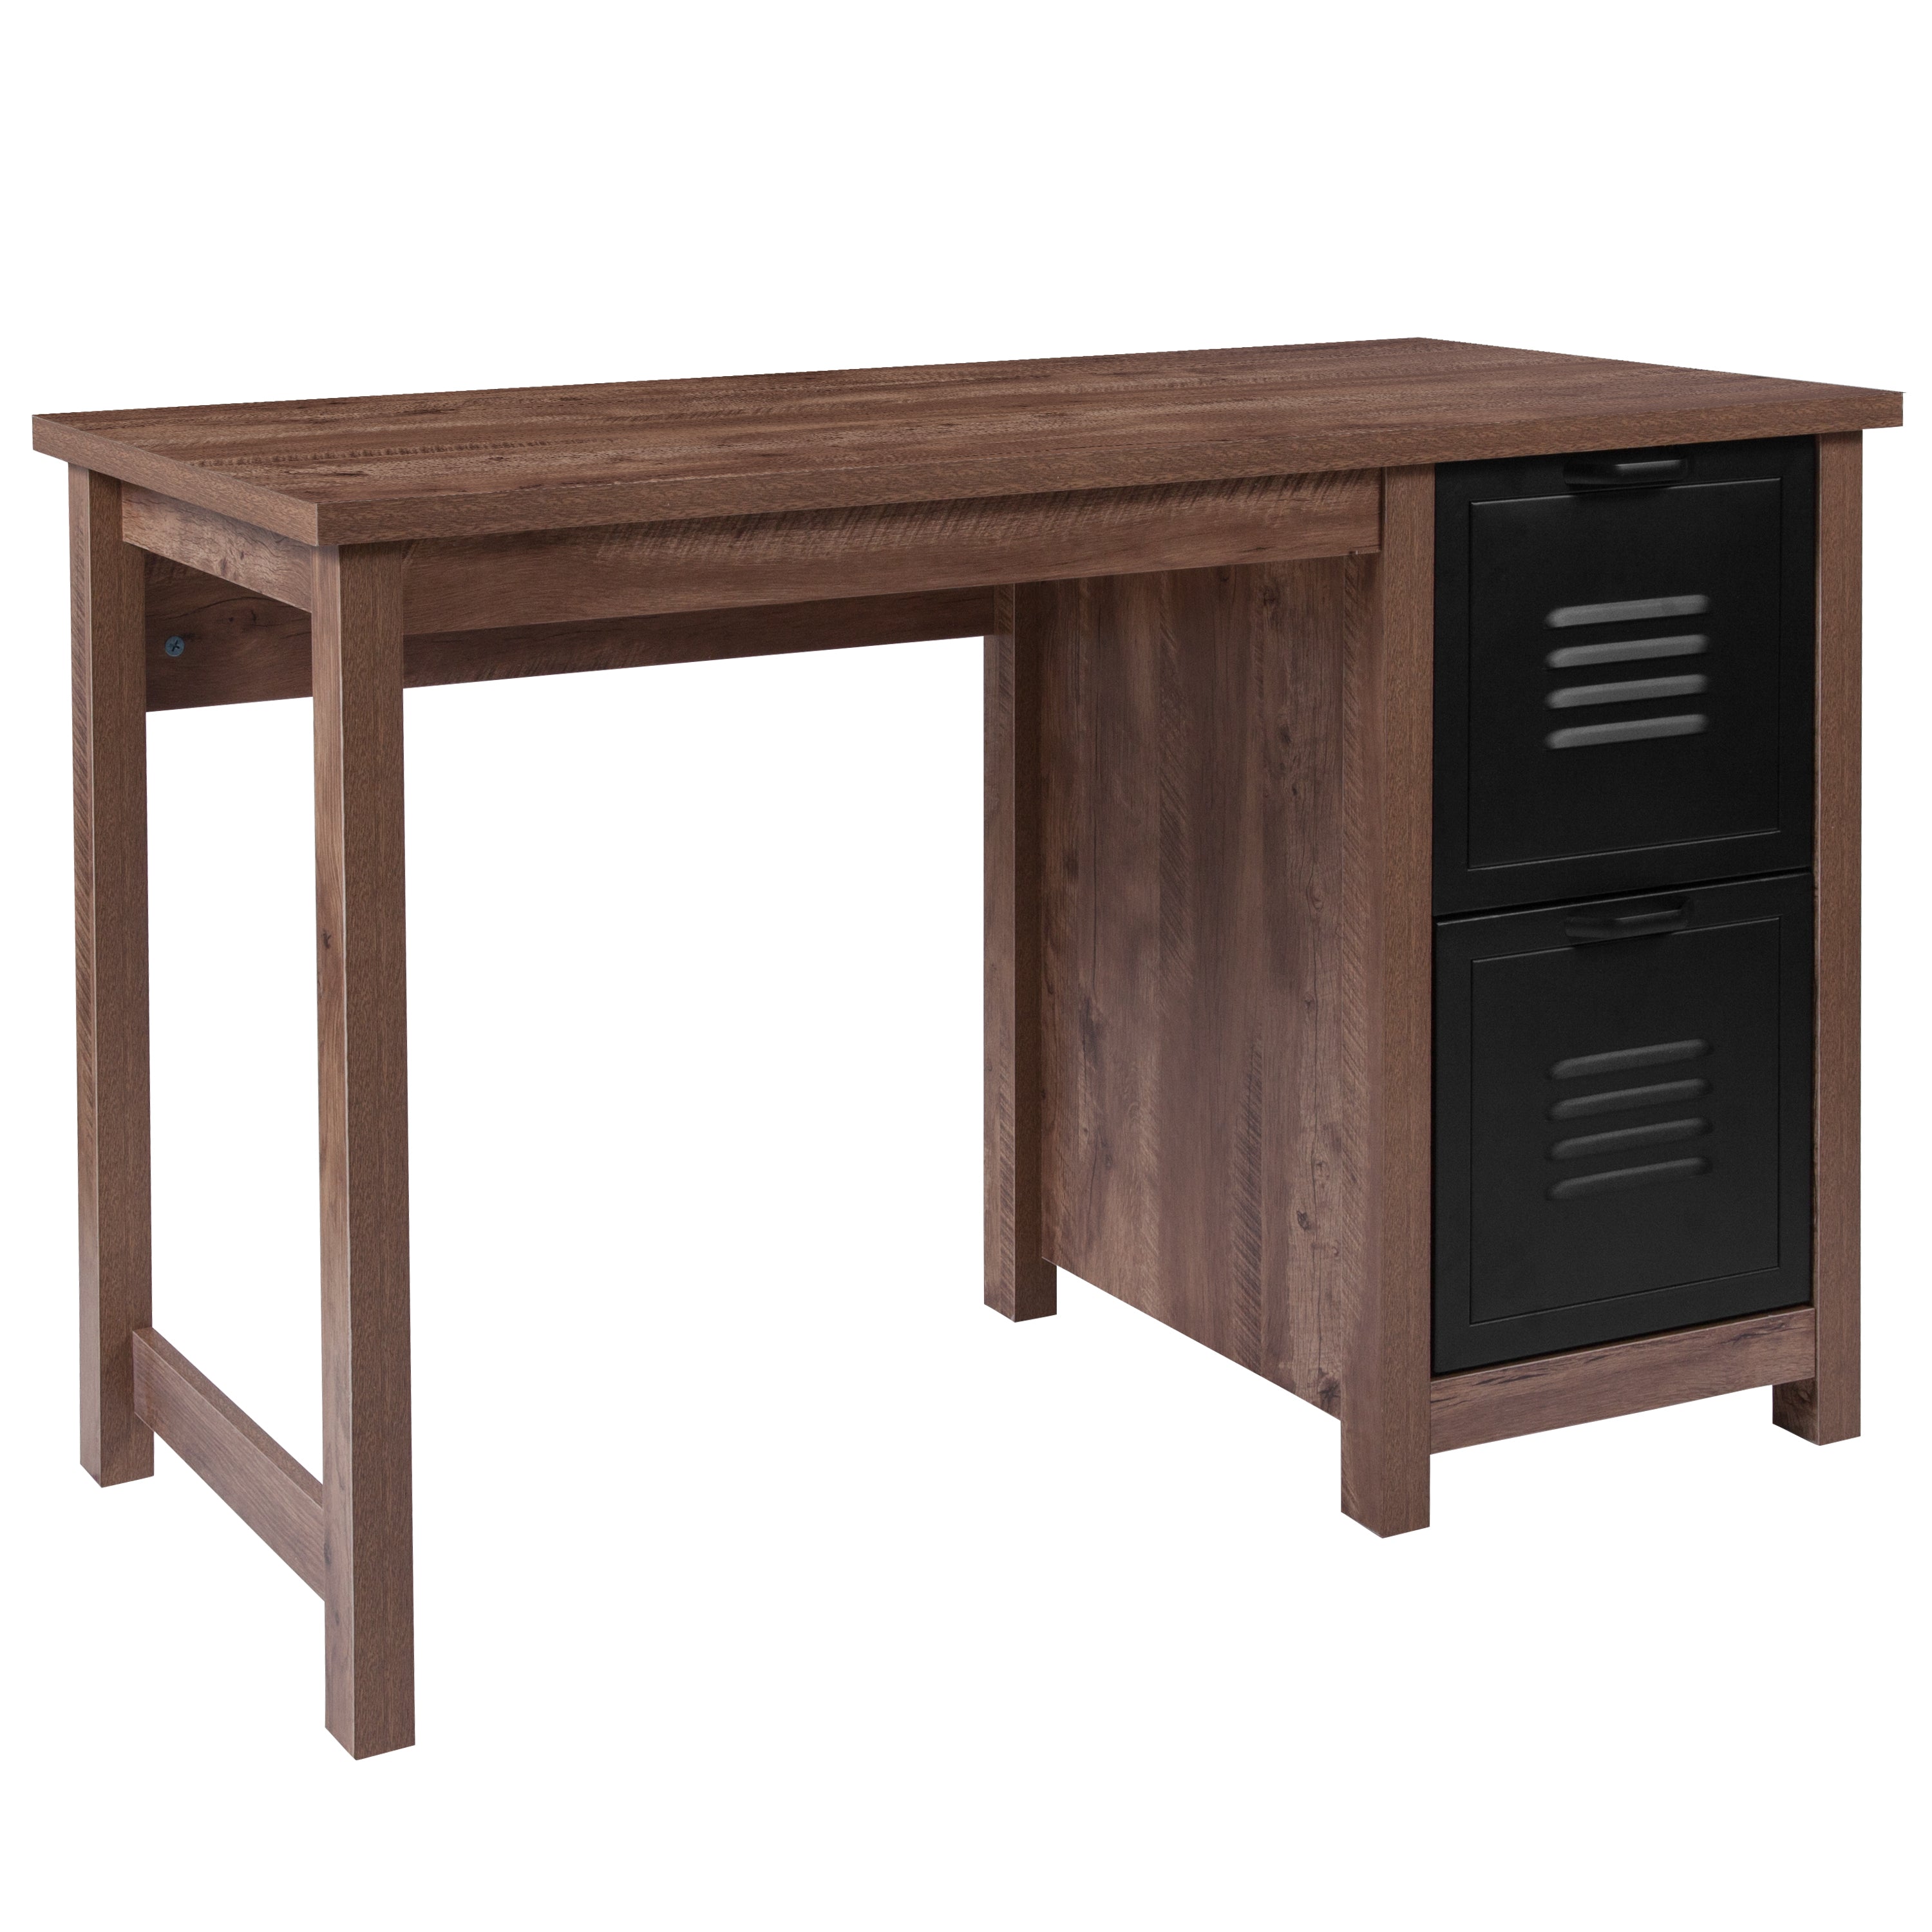 New Lancaster Collection Wood Grain Finish Computer Desk with Metal Drawers-Desk-Flash Furniture-Wall2Wall Furnishings